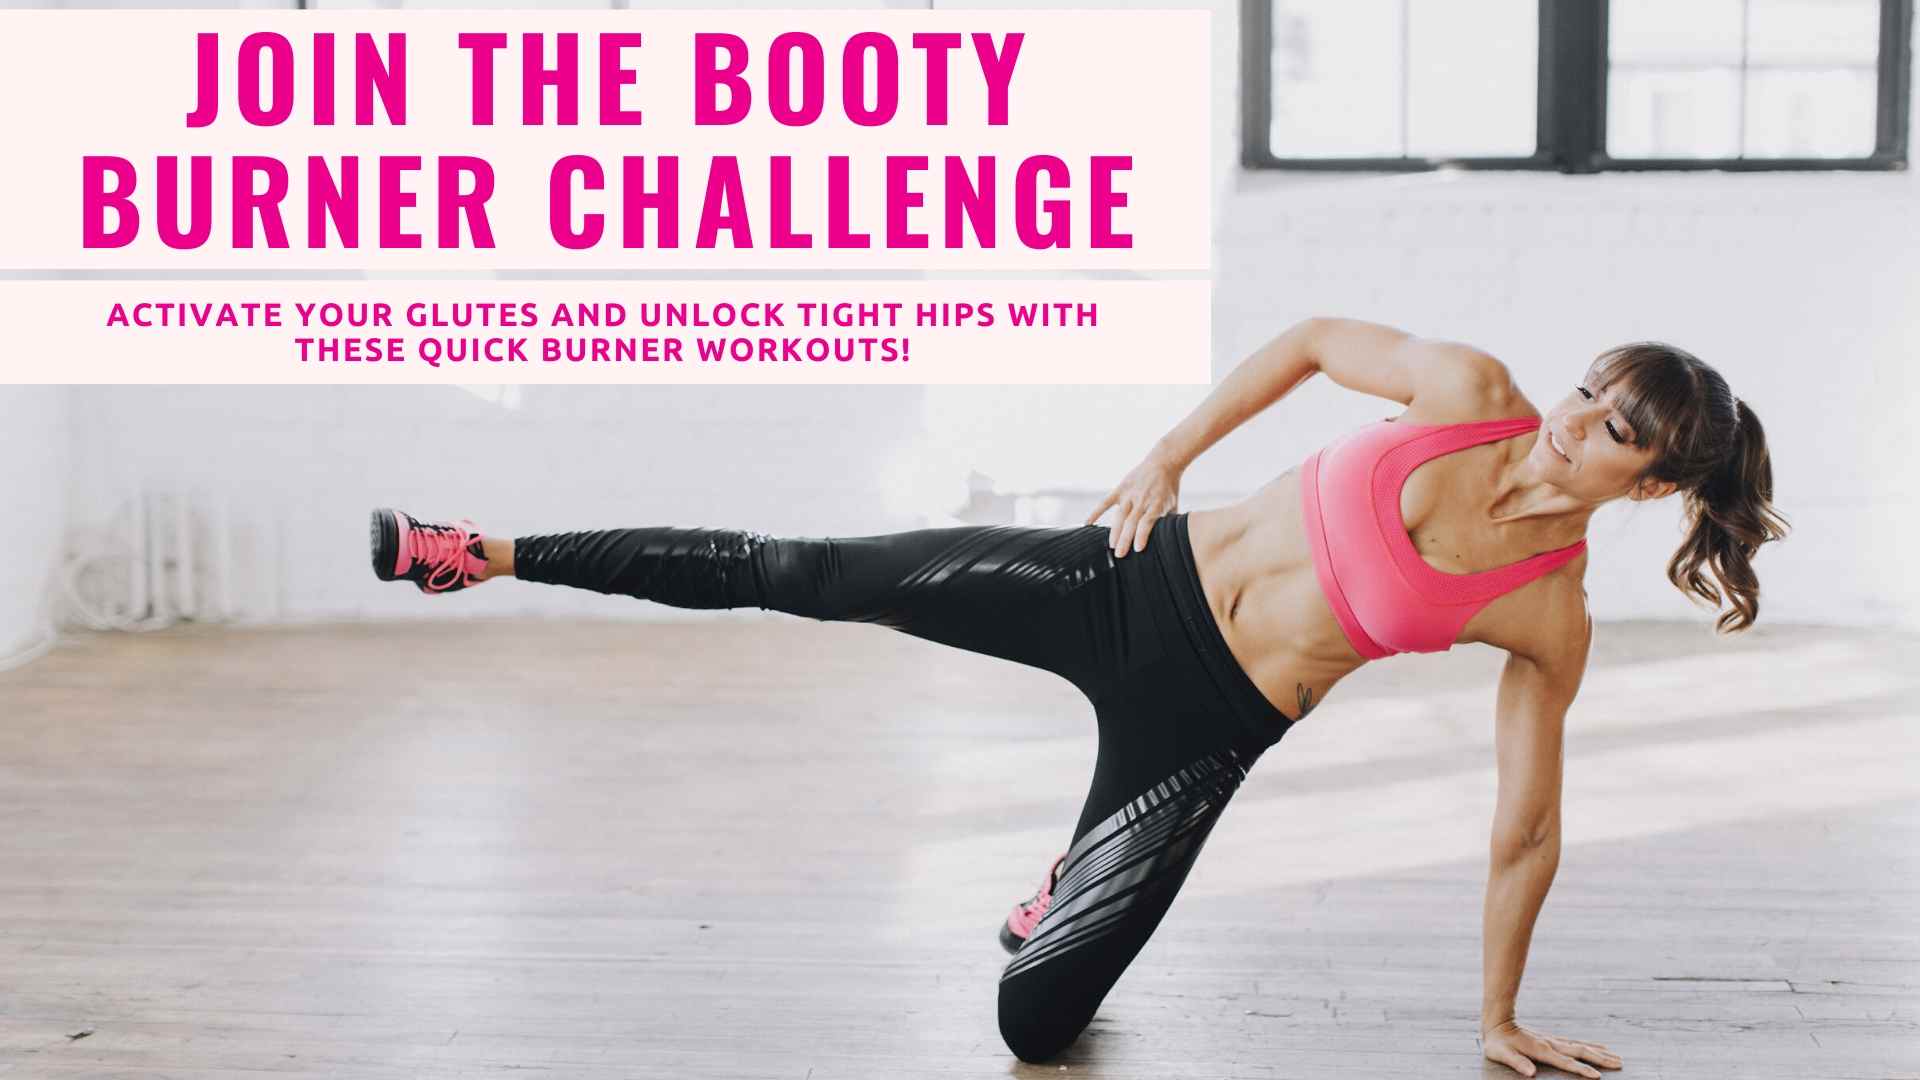 Join my booty challenge!